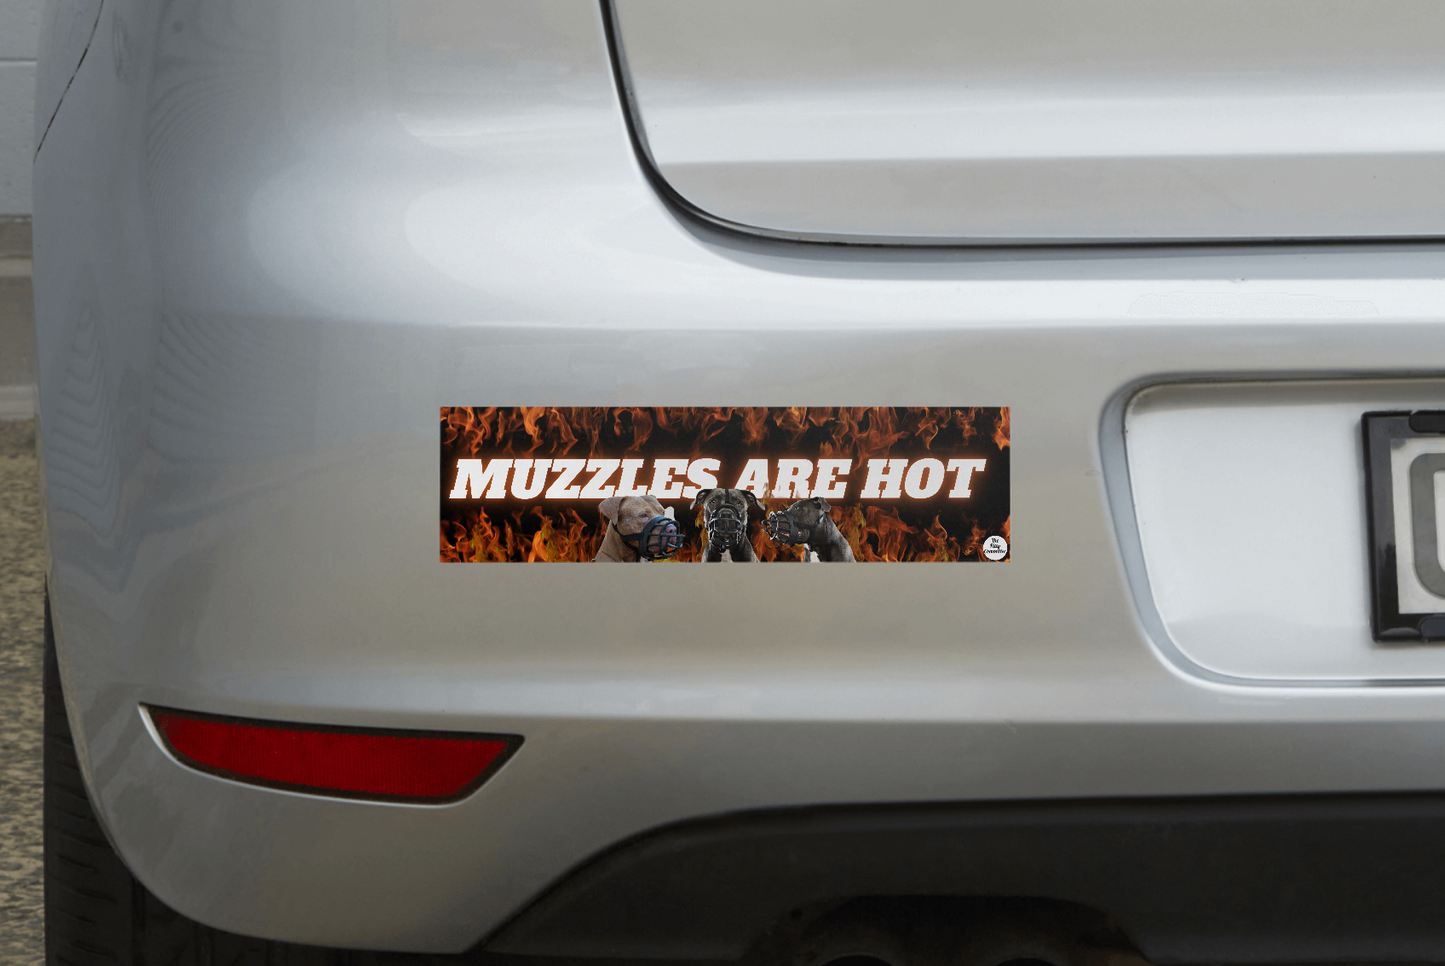 'The Pitty Committee' Bumper Sticker